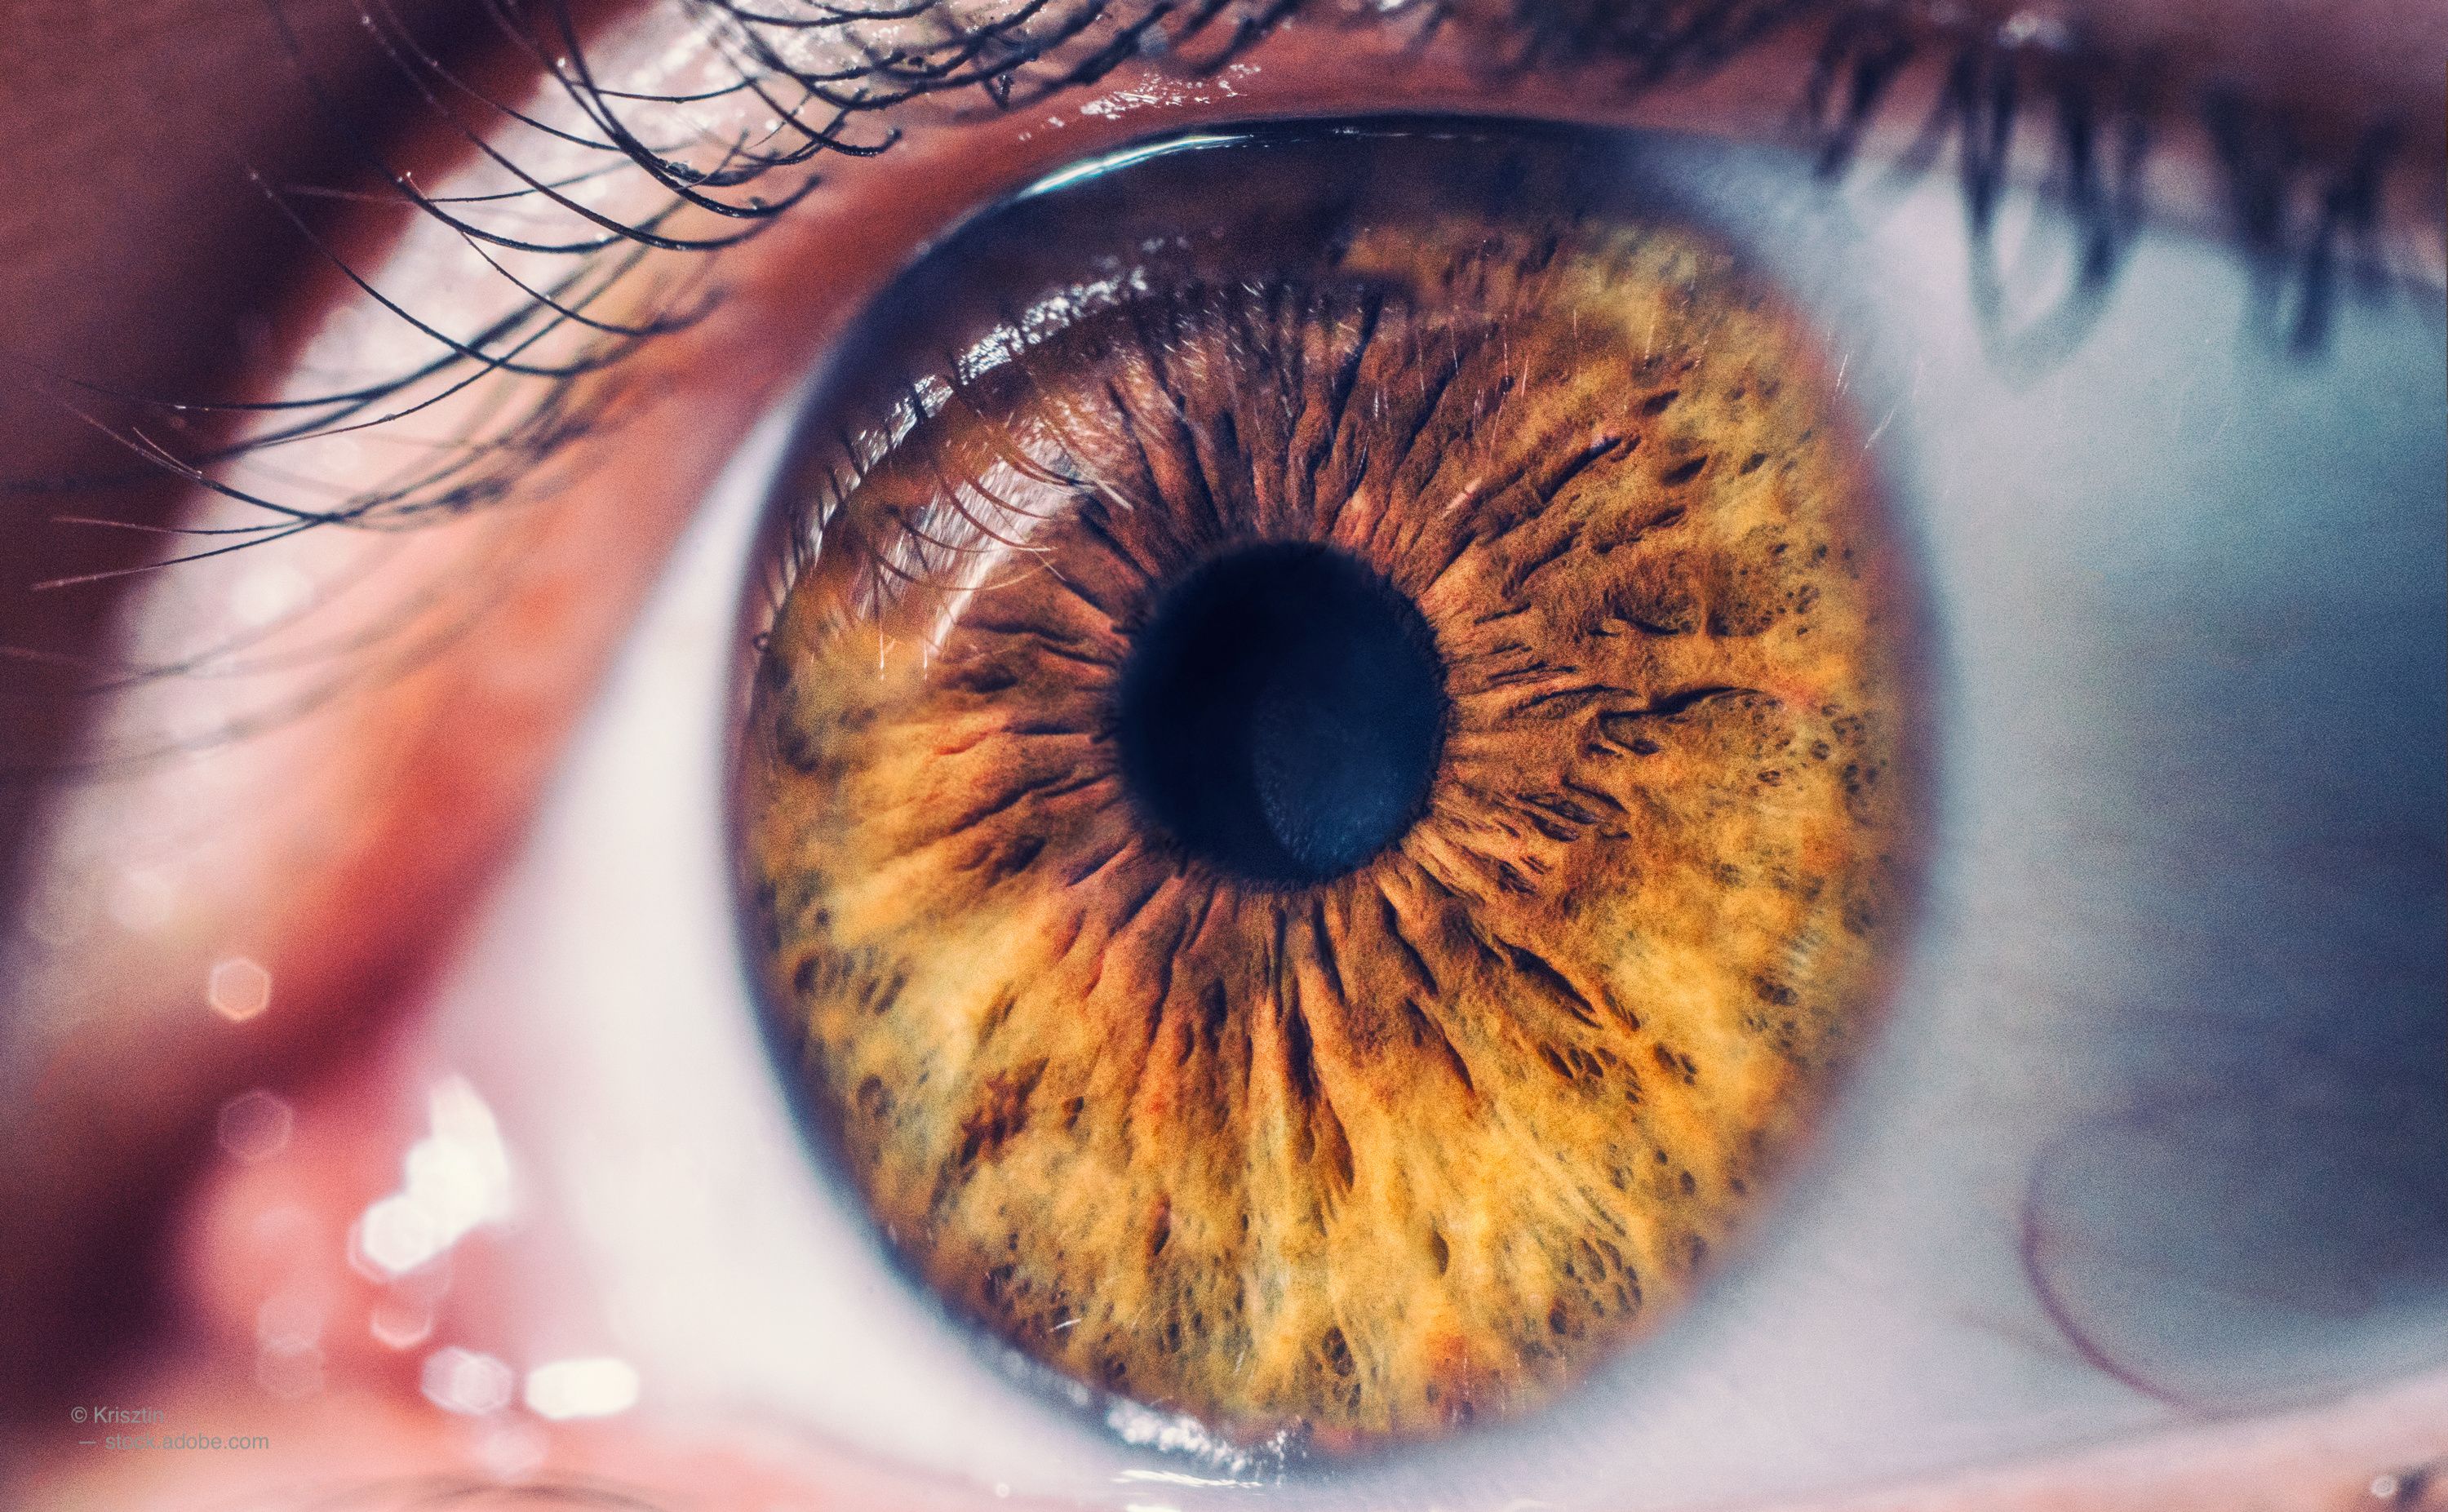 New research out of the National Eye Institute (NEI) confirms that dietary supplements can decrease the progression of age-related macular degeneration (AMD).